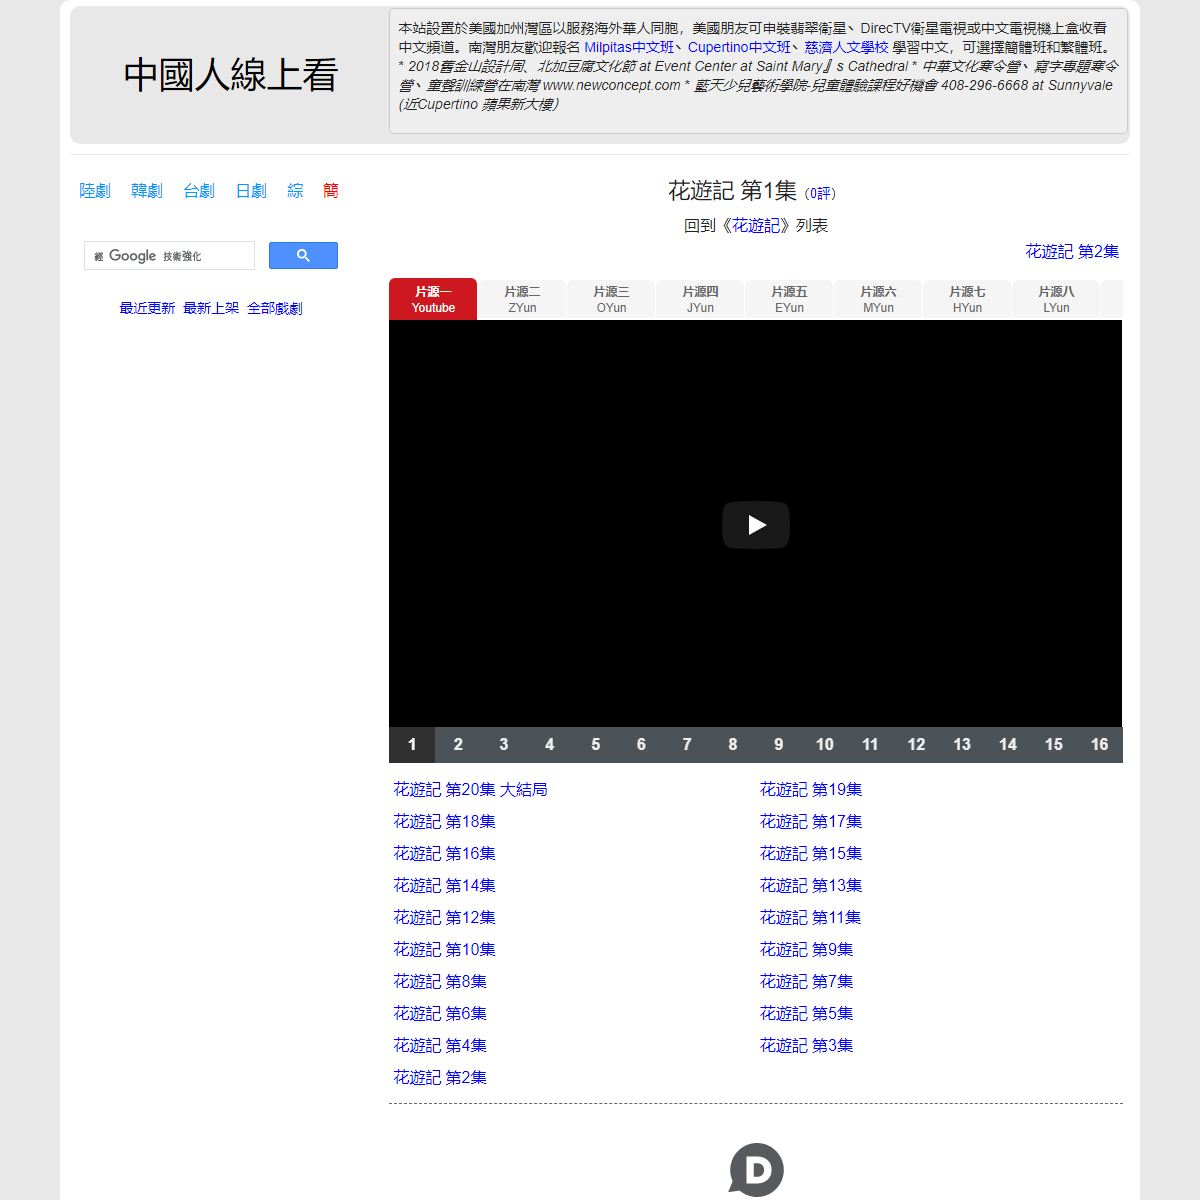 A complete backup of https://chinaq.tv/kr171223/1.html